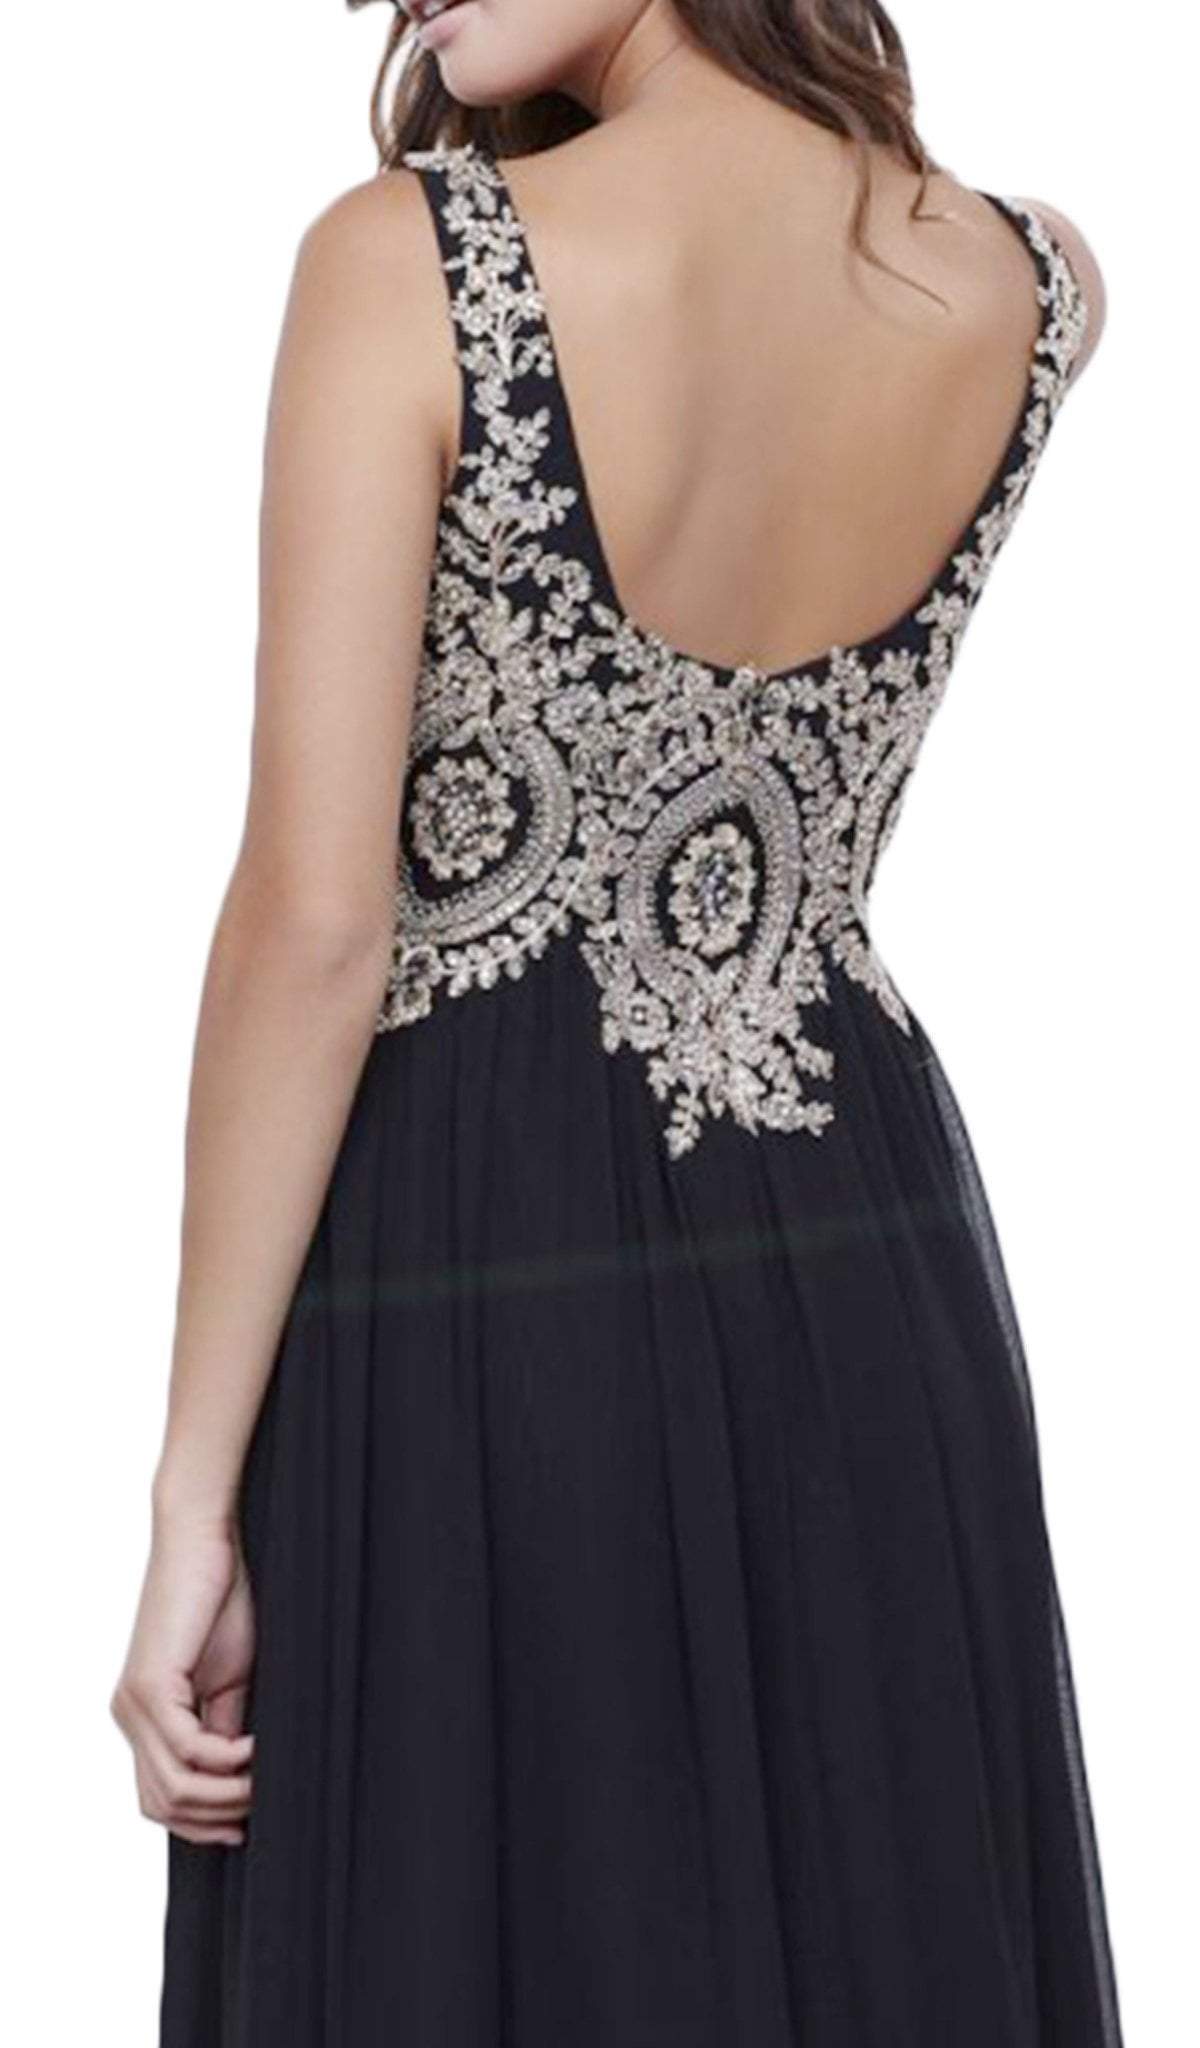 Nox Anabel - 8343 Sleeveless Beaded V Neck Lace Bodice Long Gown Special Occasion Dress XS / Black